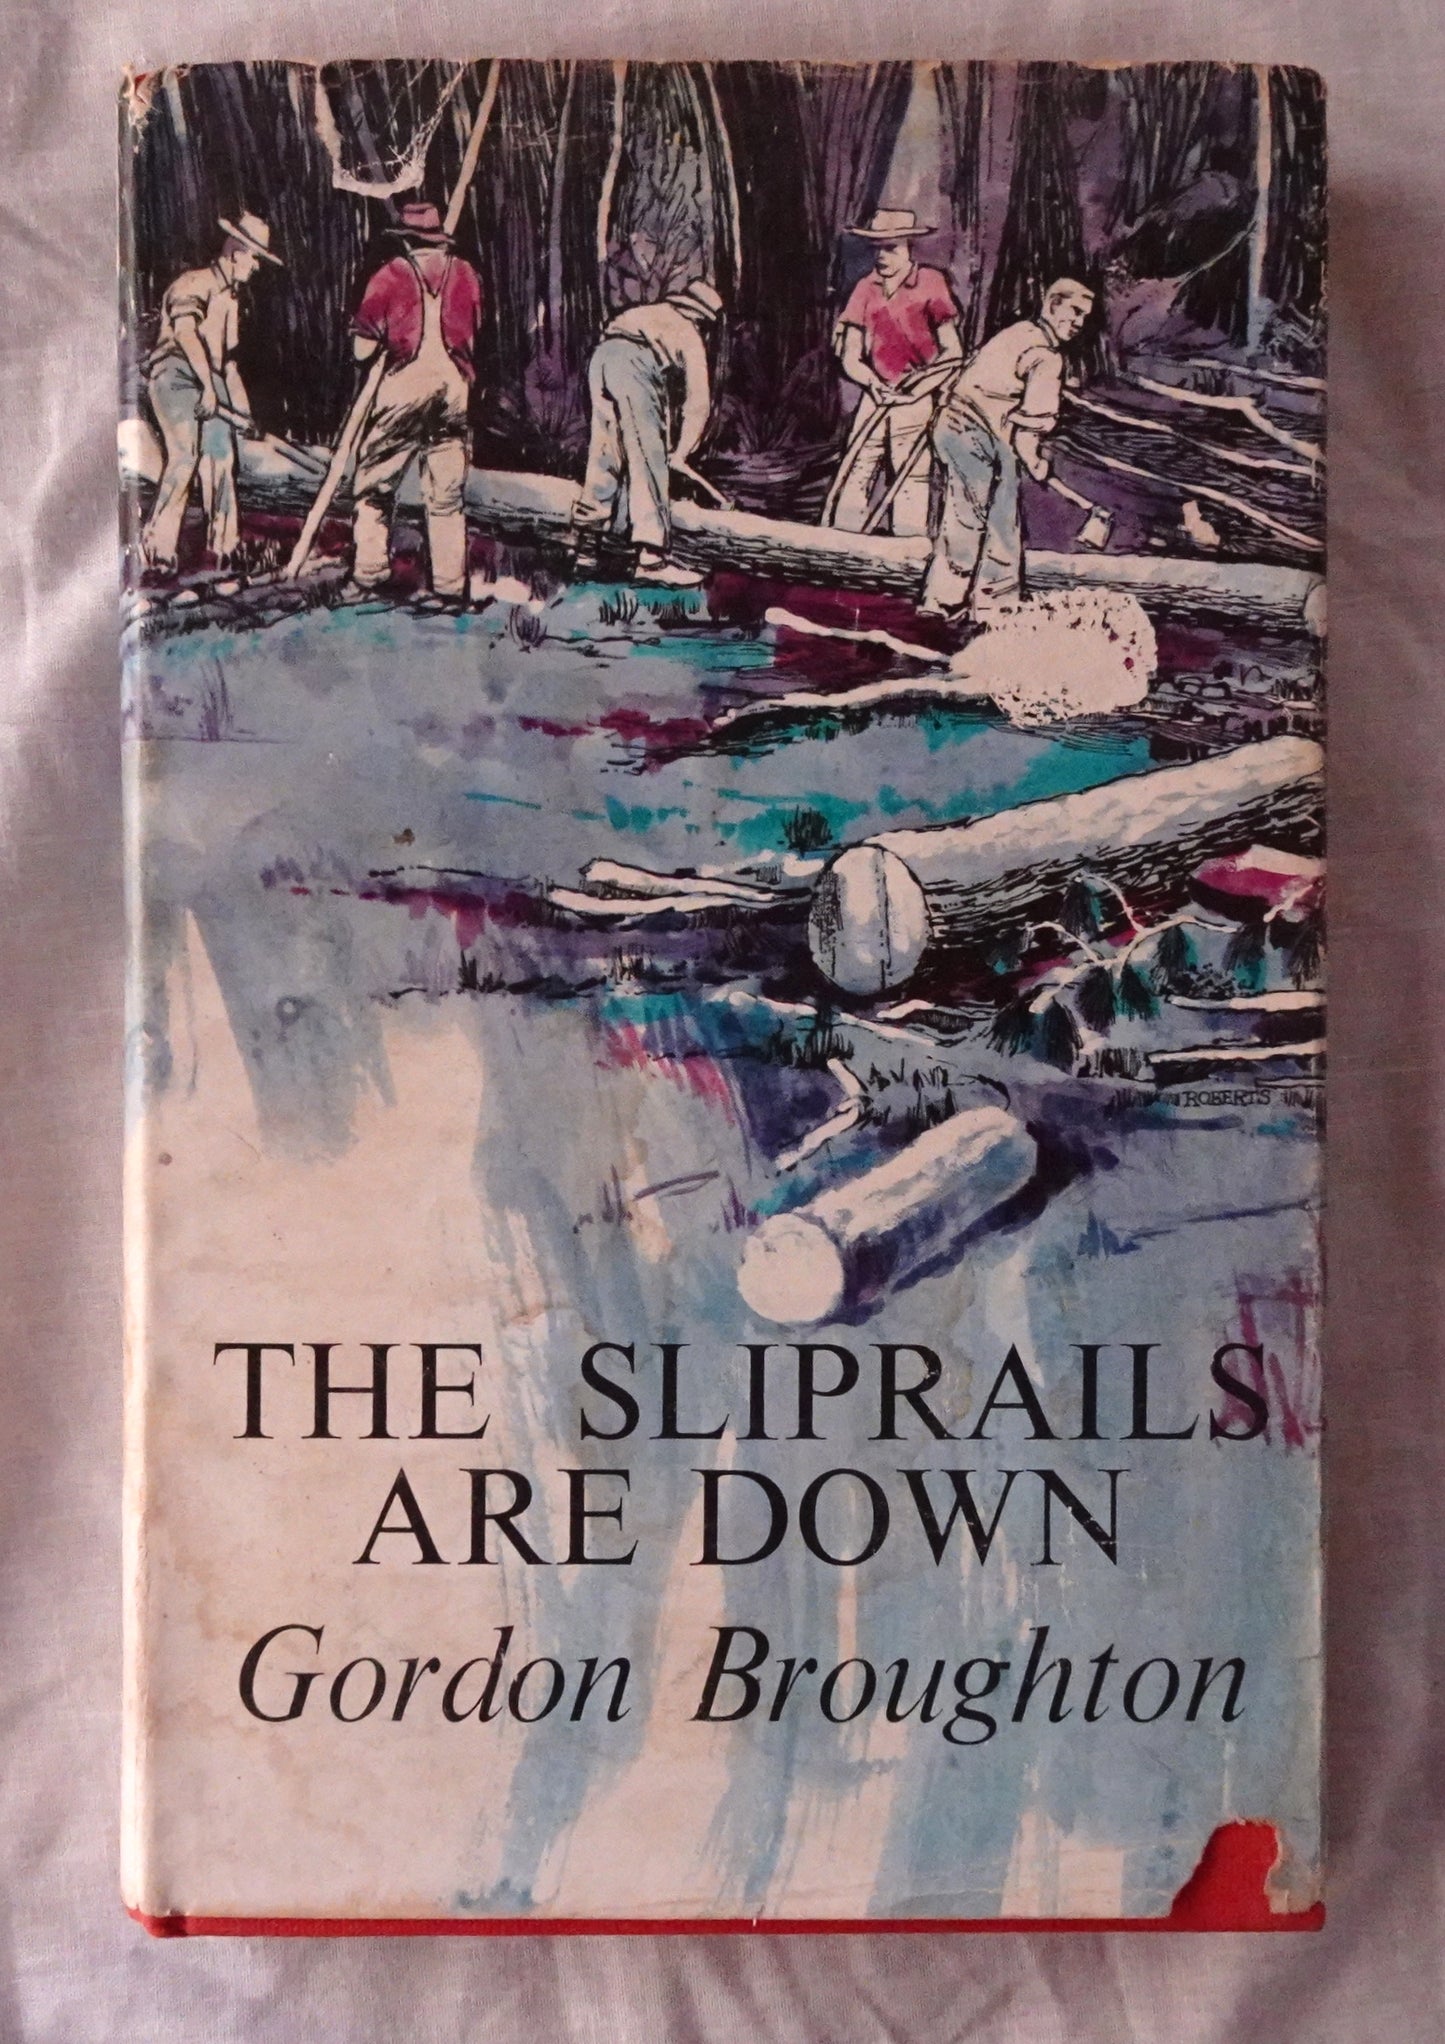 The Sliprails Are Down  by Gordon Broughton  Illustrated by Michael Brett